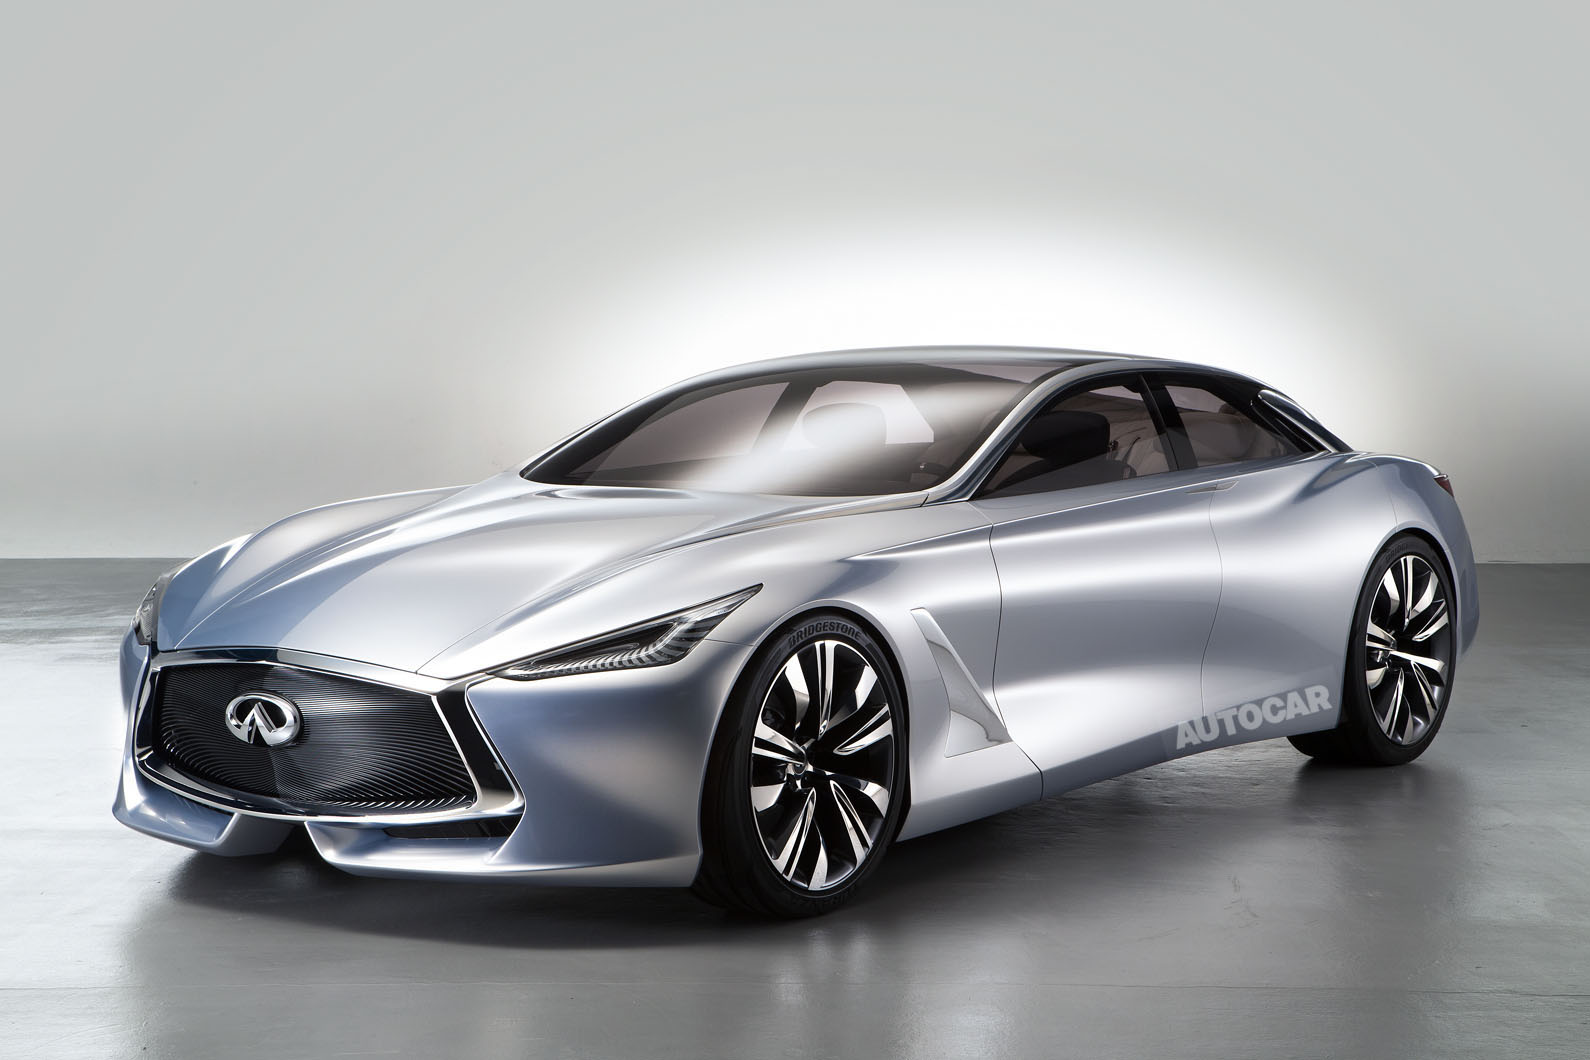 New Infiniti Q80 Inspiration Concept Exclusive Picture Gallery Autocar